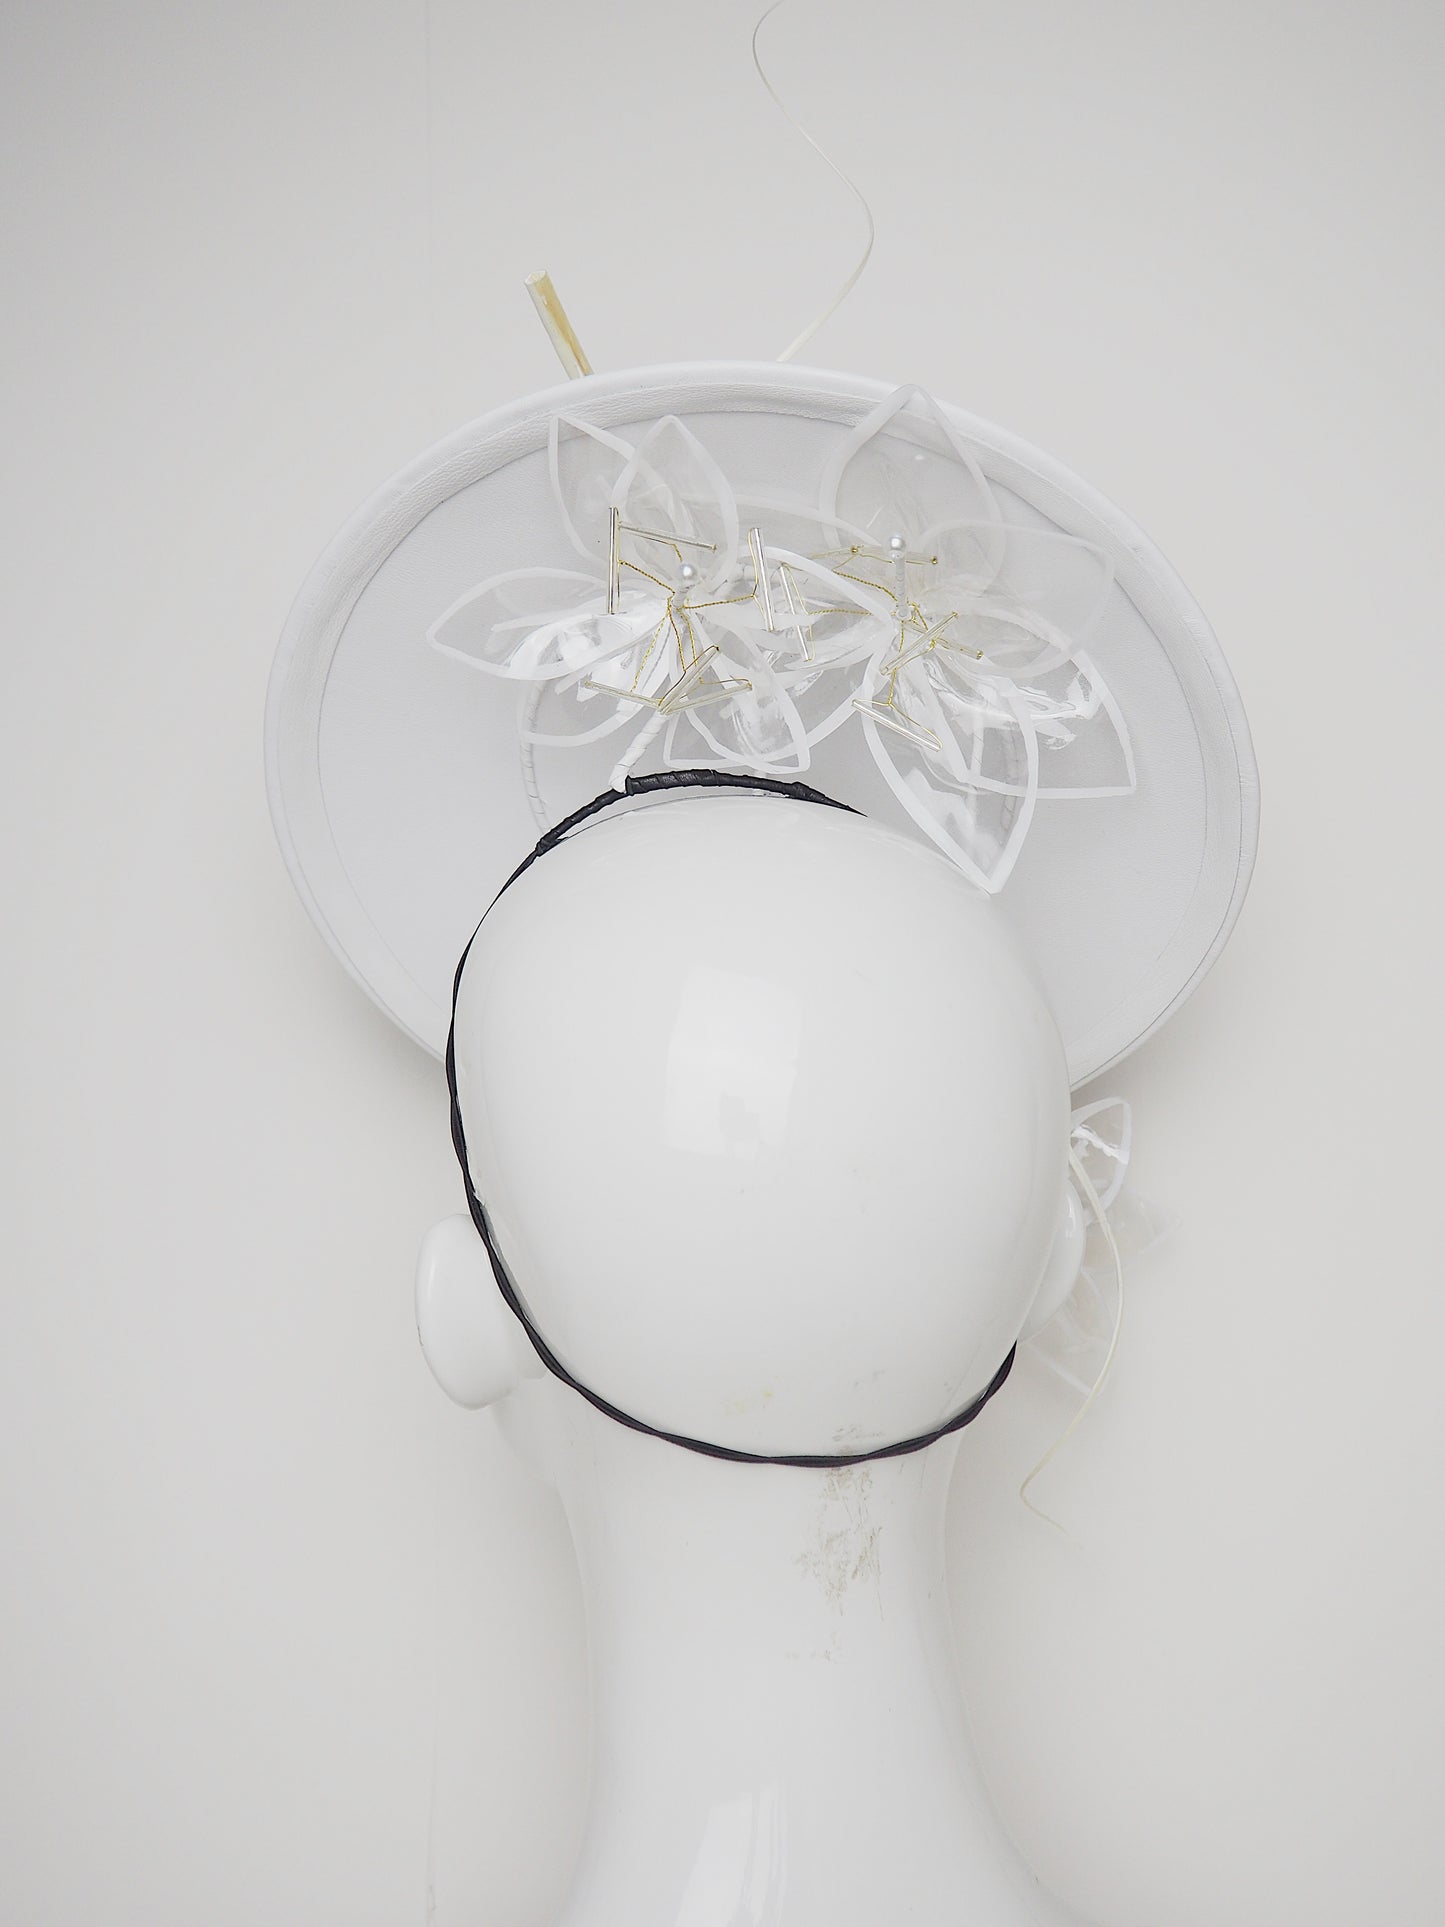 Lys En Blanc - White Crystoform Lillies on a floating leather disk with quill detail.